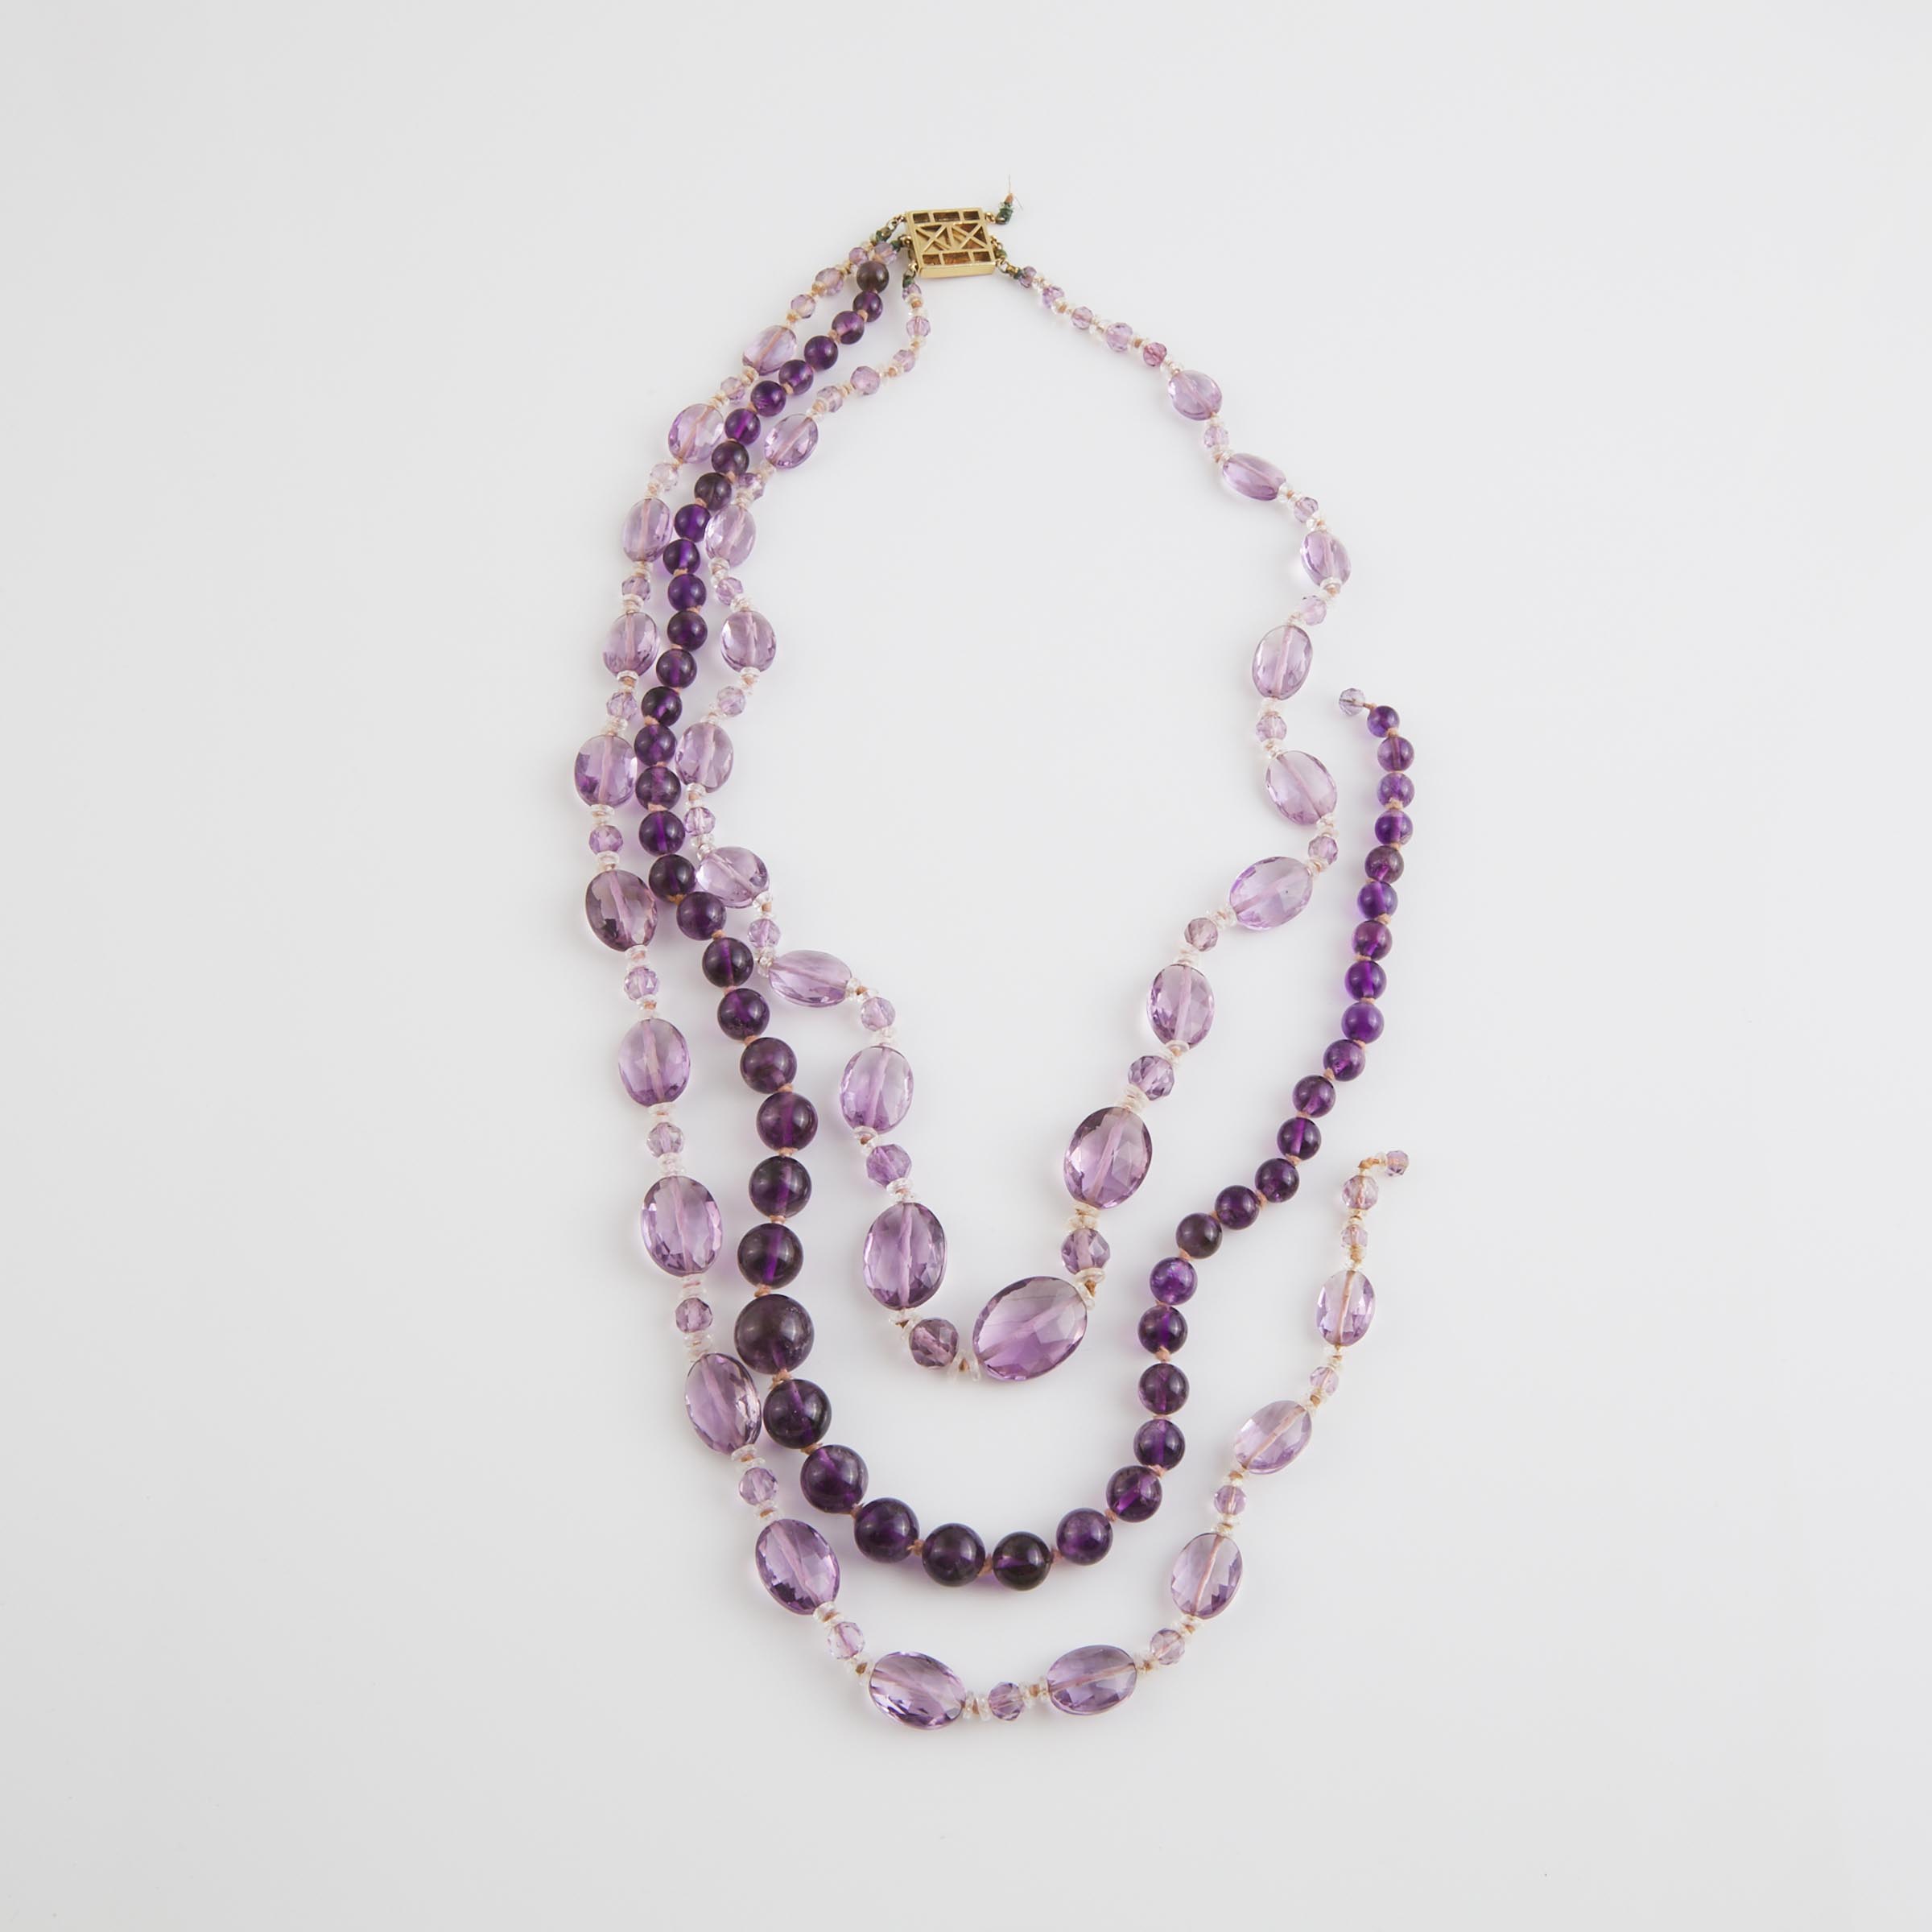 Triple Stand Amethyst Bead Necklace